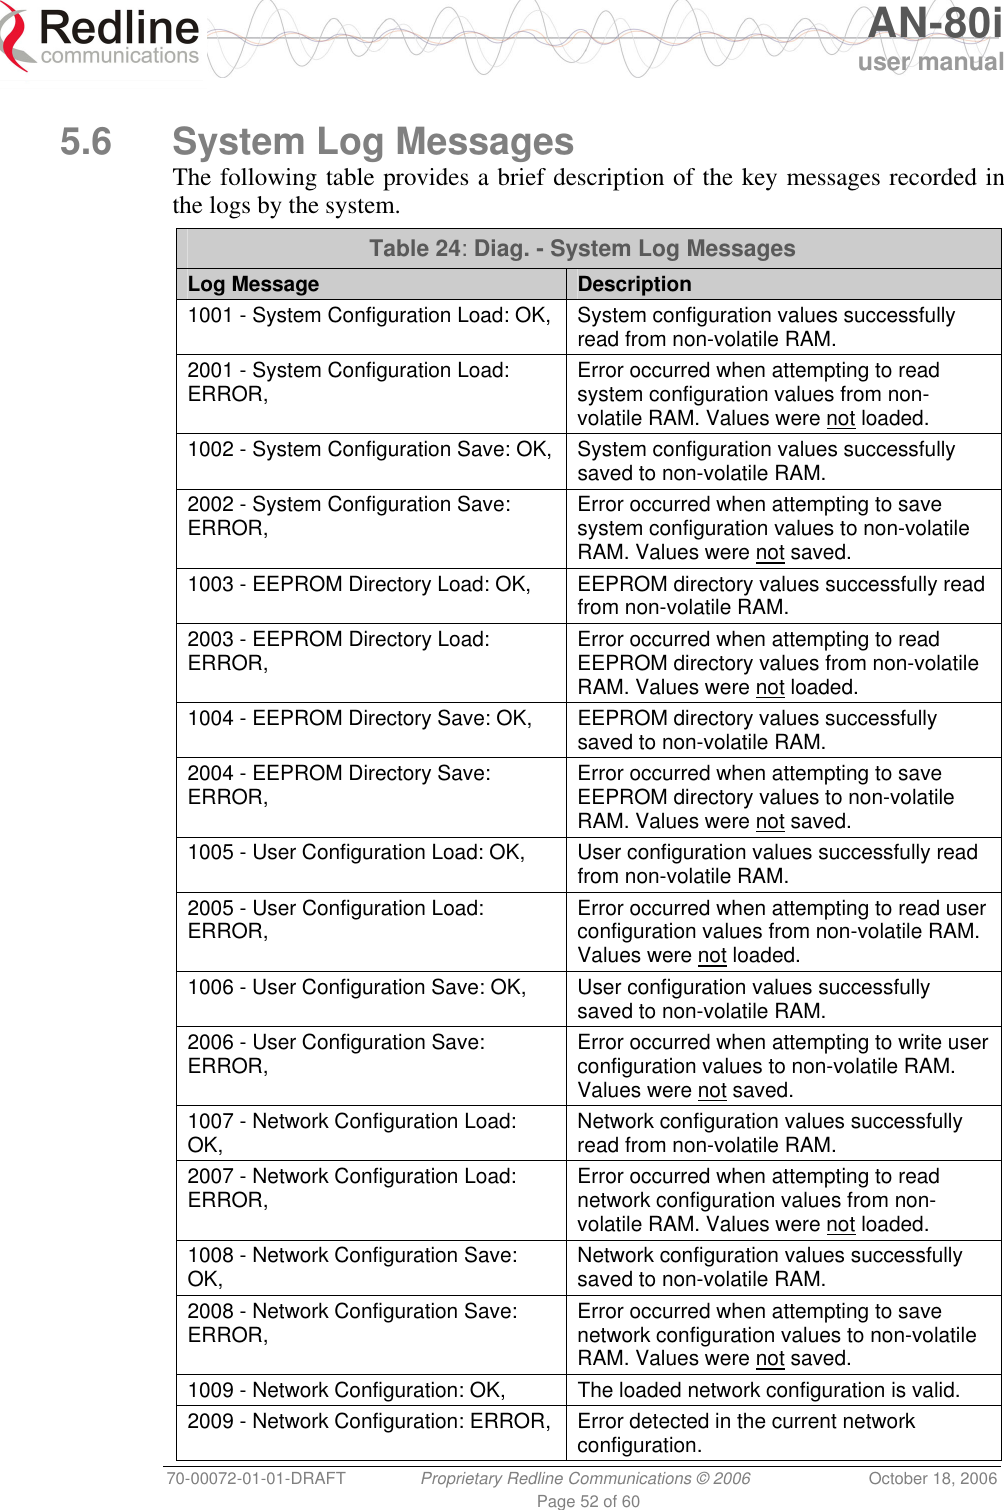   AN-80i user manual 70-00072-01-01-DRAFT  Proprietary Redline Communications © 2006  October 18, 2006 Page 52 of 60  5.6 System Log Messages The following table provides a brief description of the key messages recorded in the logs by the system. Table 24: Diag. - System Log Messages Log Message  Description 1001 - System Configuration Load: OK,  System configuration values successfully read from non-volatile RAM. 2001 - System Configuration Load: ERROR,  Error occurred when attempting to read system configuration values from non-volatile RAM. Values were not loaded. 1002 - System Configuration Save: OK,  System configuration values successfully saved to non-volatile RAM. 2002 - System Configuration Save: ERROR,  Error occurred when attempting to save system configuration values to non-volatile RAM. Values were not saved. 1003 - EEPROM Directory Load: OK,  EEPROM directory values successfully read from non-volatile RAM. 2003 - EEPROM Directory Load: ERROR,  Error occurred when attempting to read EEPROM directory values from non-volatile RAM. Values were not loaded. 1004 - EEPROM Directory Save: OK,  EEPROM directory values successfully saved to non-volatile RAM. 2004 - EEPROM Directory Save: ERROR,  Error occurred when attempting to save EEPROM directory values to non-volatile RAM. Values were not saved. 1005 - User Configuration Load: OK,  User configuration values successfully read from non-volatile RAM. 2005 - User Configuration Load: ERROR,  Error occurred when attempting to read user configuration values from non-volatile RAM. Values were not loaded. 1006 - User Configuration Save: OK,  User configuration values successfully saved to non-volatile RAM. 2006 - User Configuration Save: ERROR,  Error occurred when attempting to write user configuration values to non-volatile RAM. Values were not saved. 1007 - Network Configuration Load: OK,  Network configuration values successfully read from non-volatile RAM. 2007 - Network Configuration Load: ERROR,  Error occurred when attempting to read network configuration values from non-volatile RAM. Values were not loaded. 1008 - Network Configuration Save: OK,  Network configuration values successfully saved to non-volatile RAM. 2008 - Network Configuration Save: ERROR,  Error occurred when attempting to save network configuration values to non-volatile RAM. Values were not saved. 1009 - Network Configuration: OK,  The loaded network configuration is valid. 2009 - Network Configuration: ERROR,  Error detected in the current network configuration. 